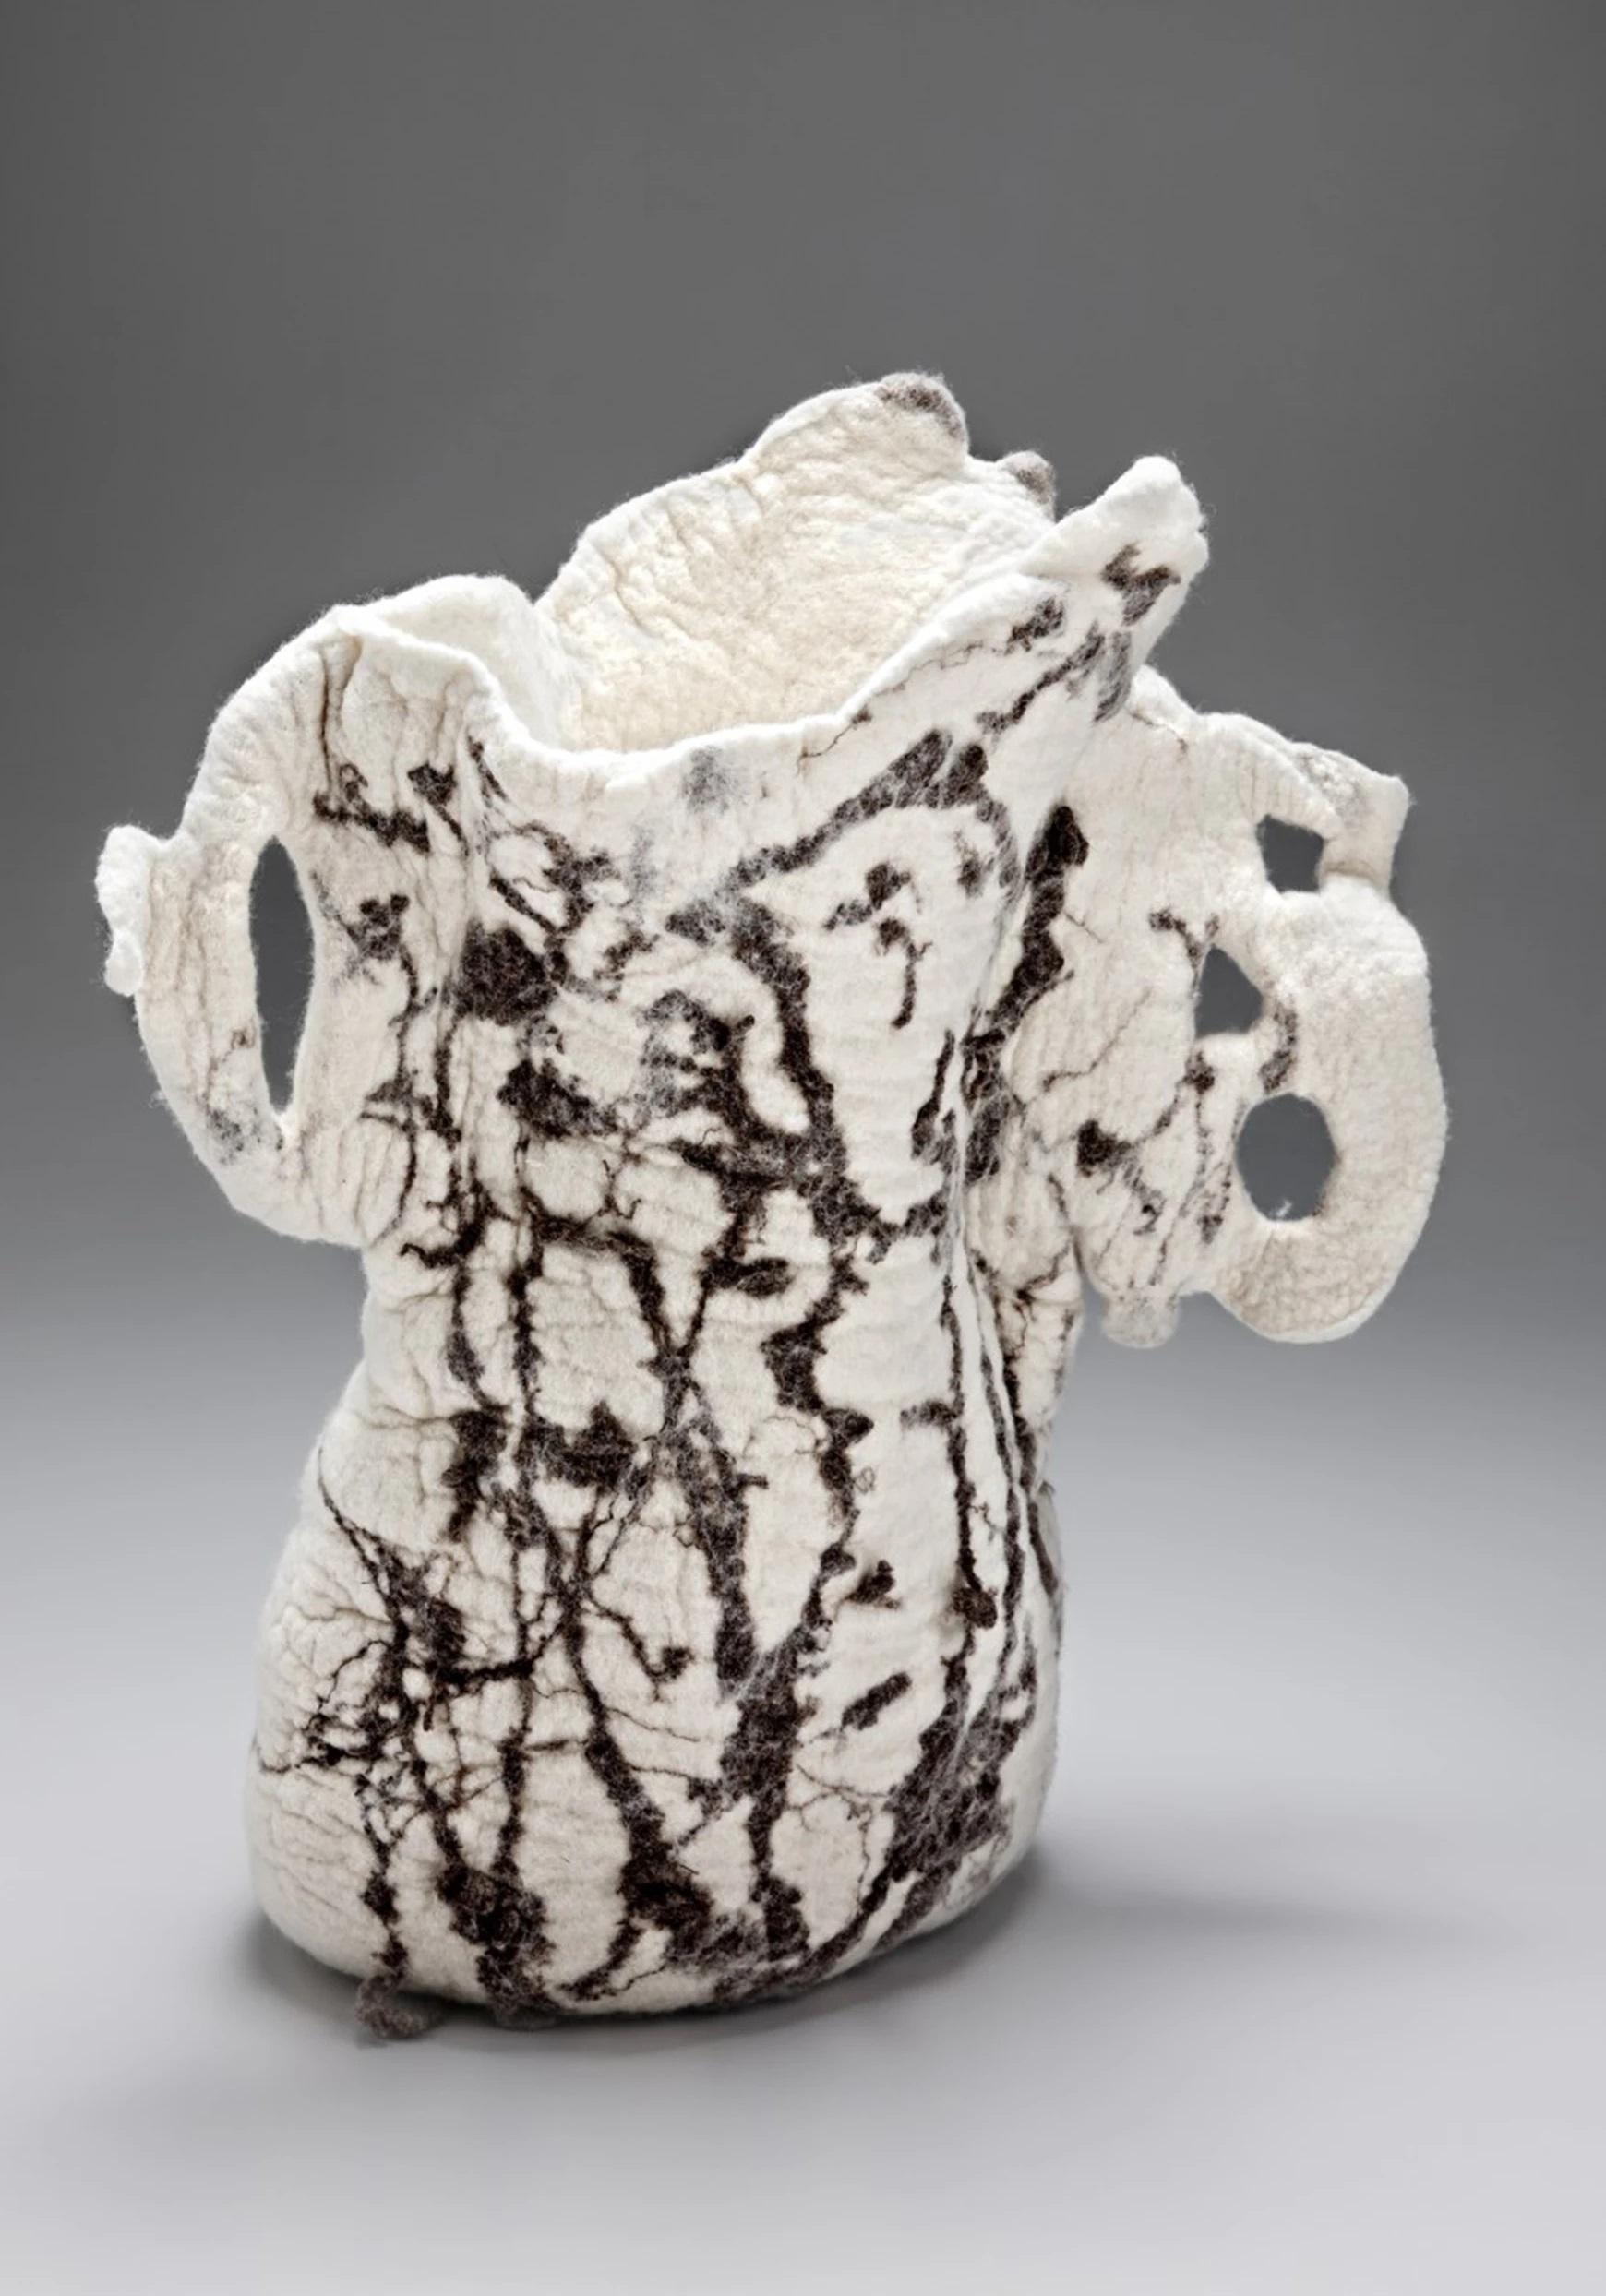 “Bueníssima ”, 2019, Naturally Dyed Felted Wool Vase by Inês Schertel, Brazil

Ines Schertel's primary material is sheep's wool. As a practitioner of Slow Design, the artist takes a holistic approach to textile design, personally overseeing the